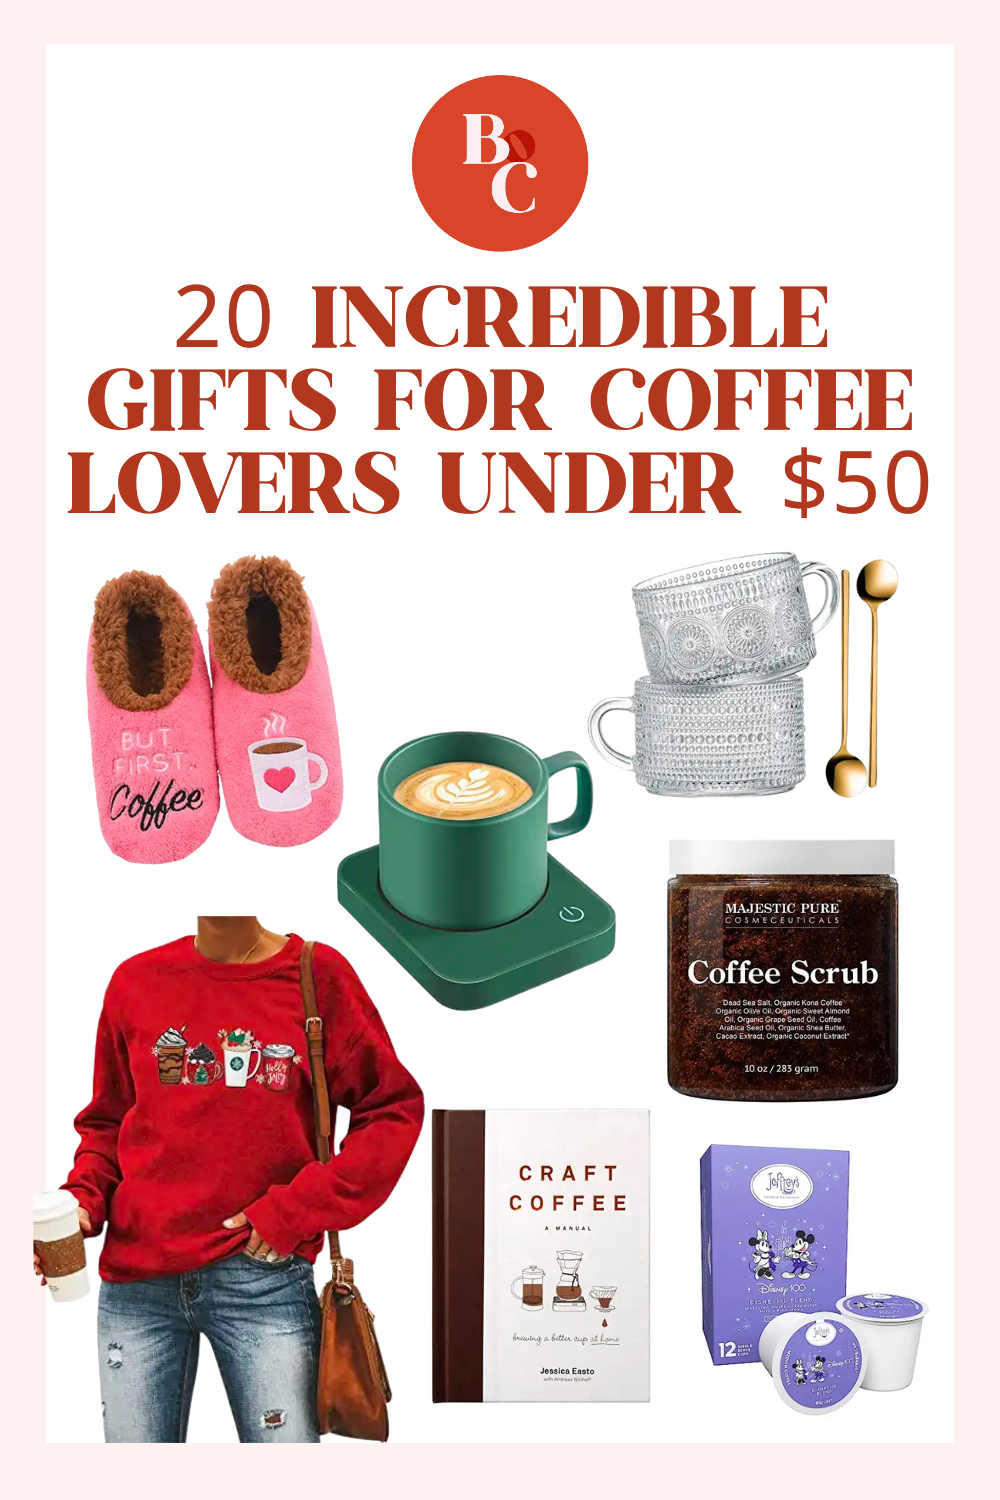 20 Incredible Gifts for Coffee Lovers Under $50